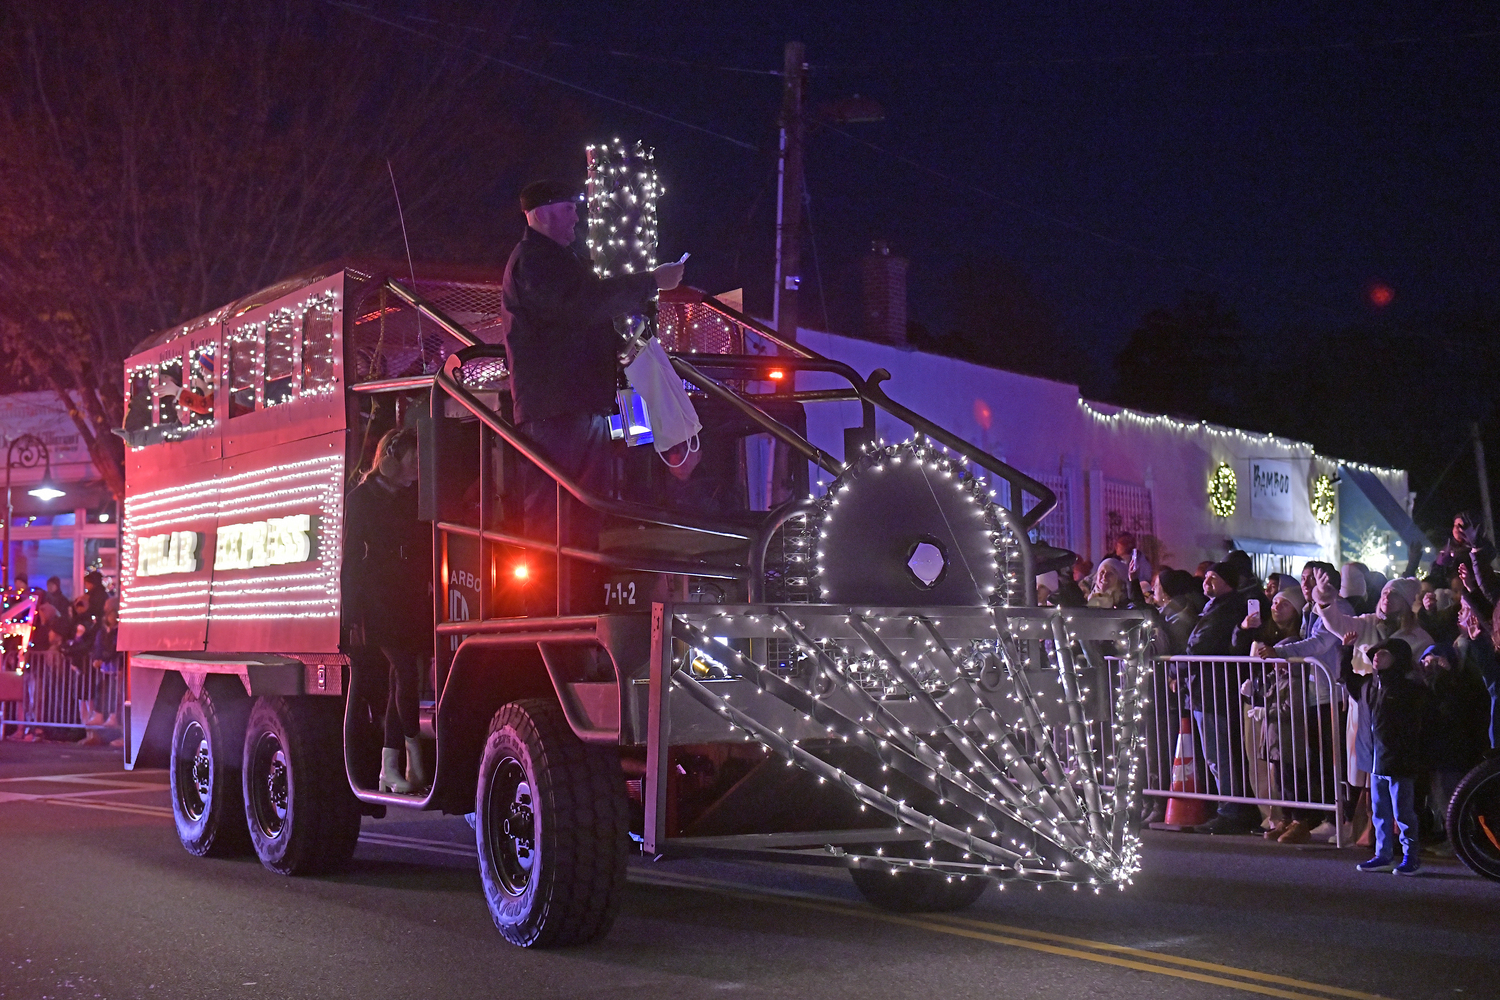 The Sag Harbor Fire Department with the Polar Express.